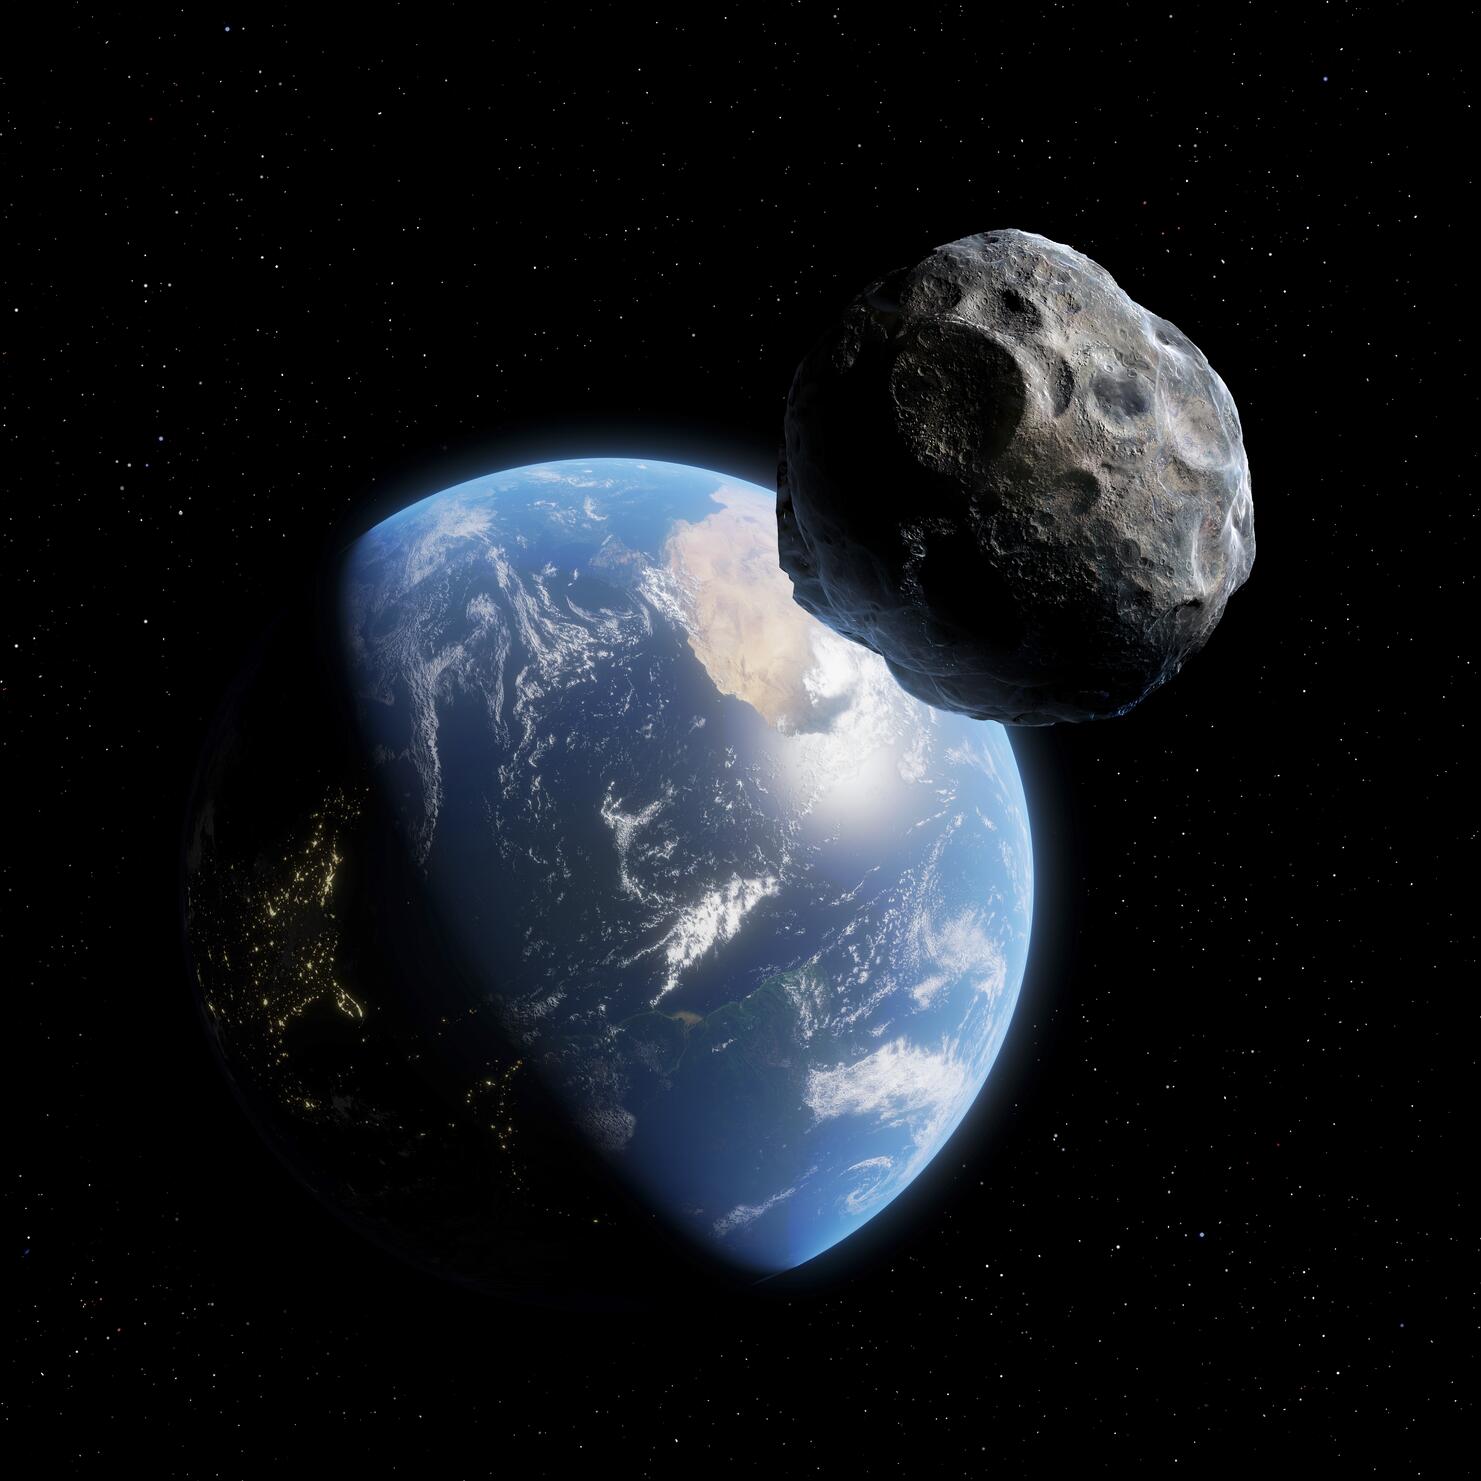 Asteroid 2013 TV135 Could Hit Earth in 2032, But NASA Says Not to Worry -  ABC News